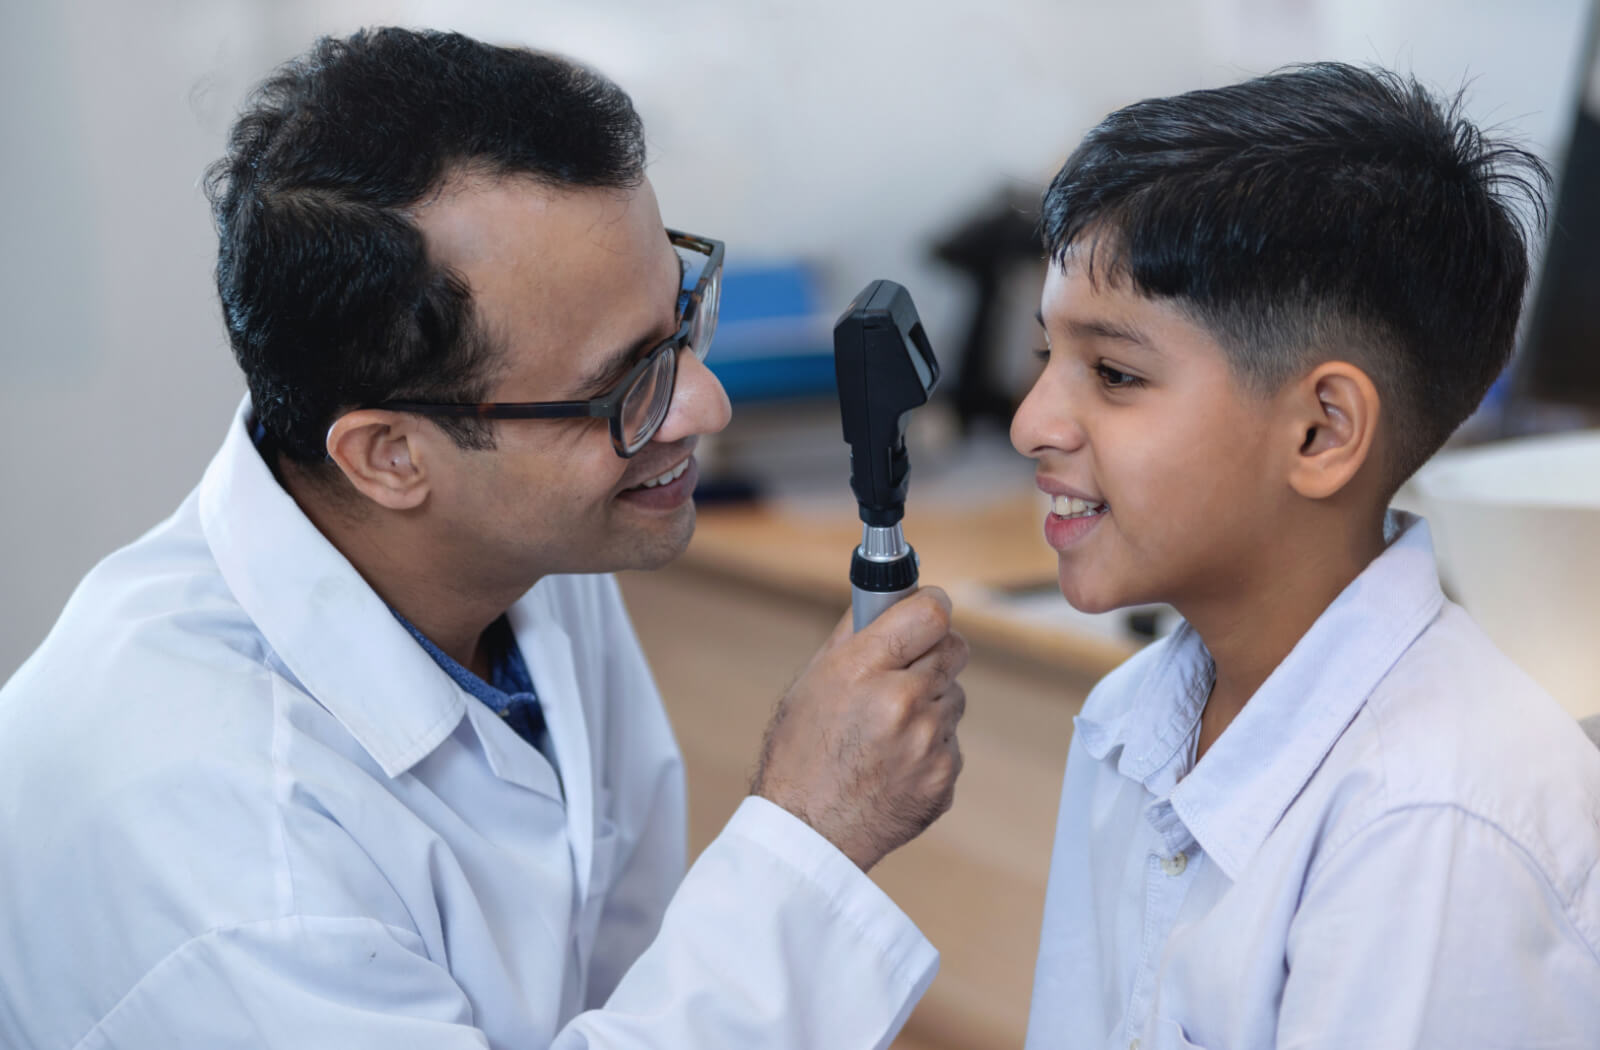 An optometrist conducts an eye exam on a child using an instrument called a direct ophthalmoscope.